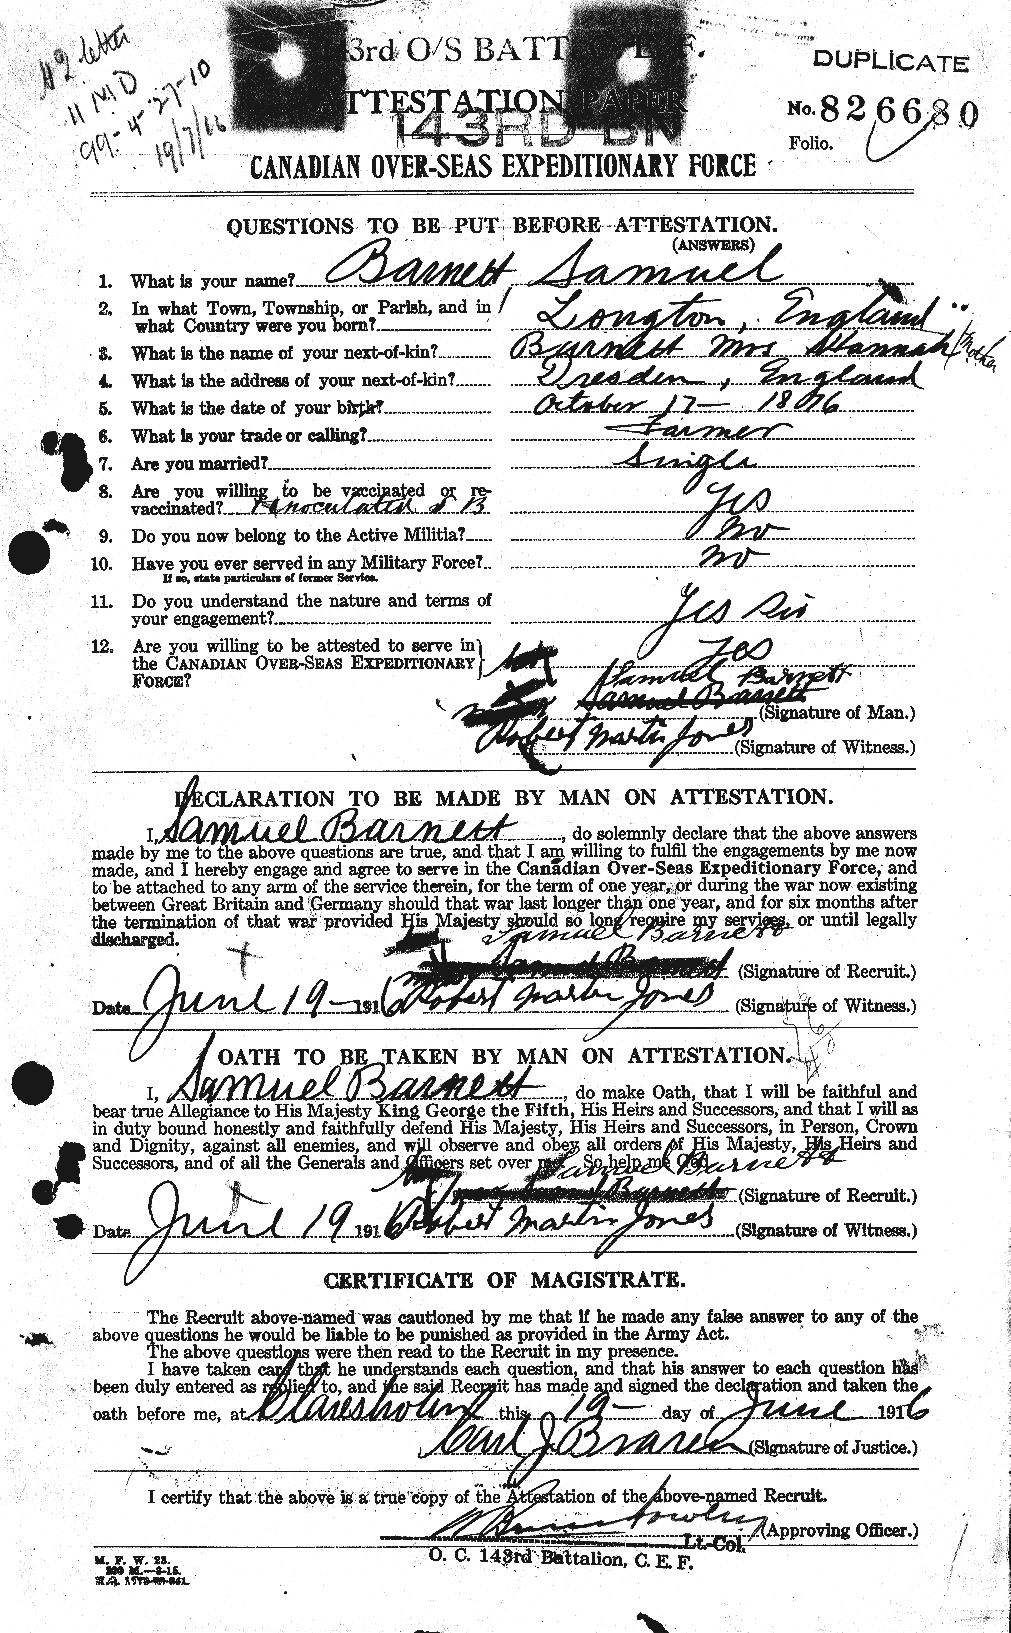 Personnel Records of the First World War - CEF 222892a